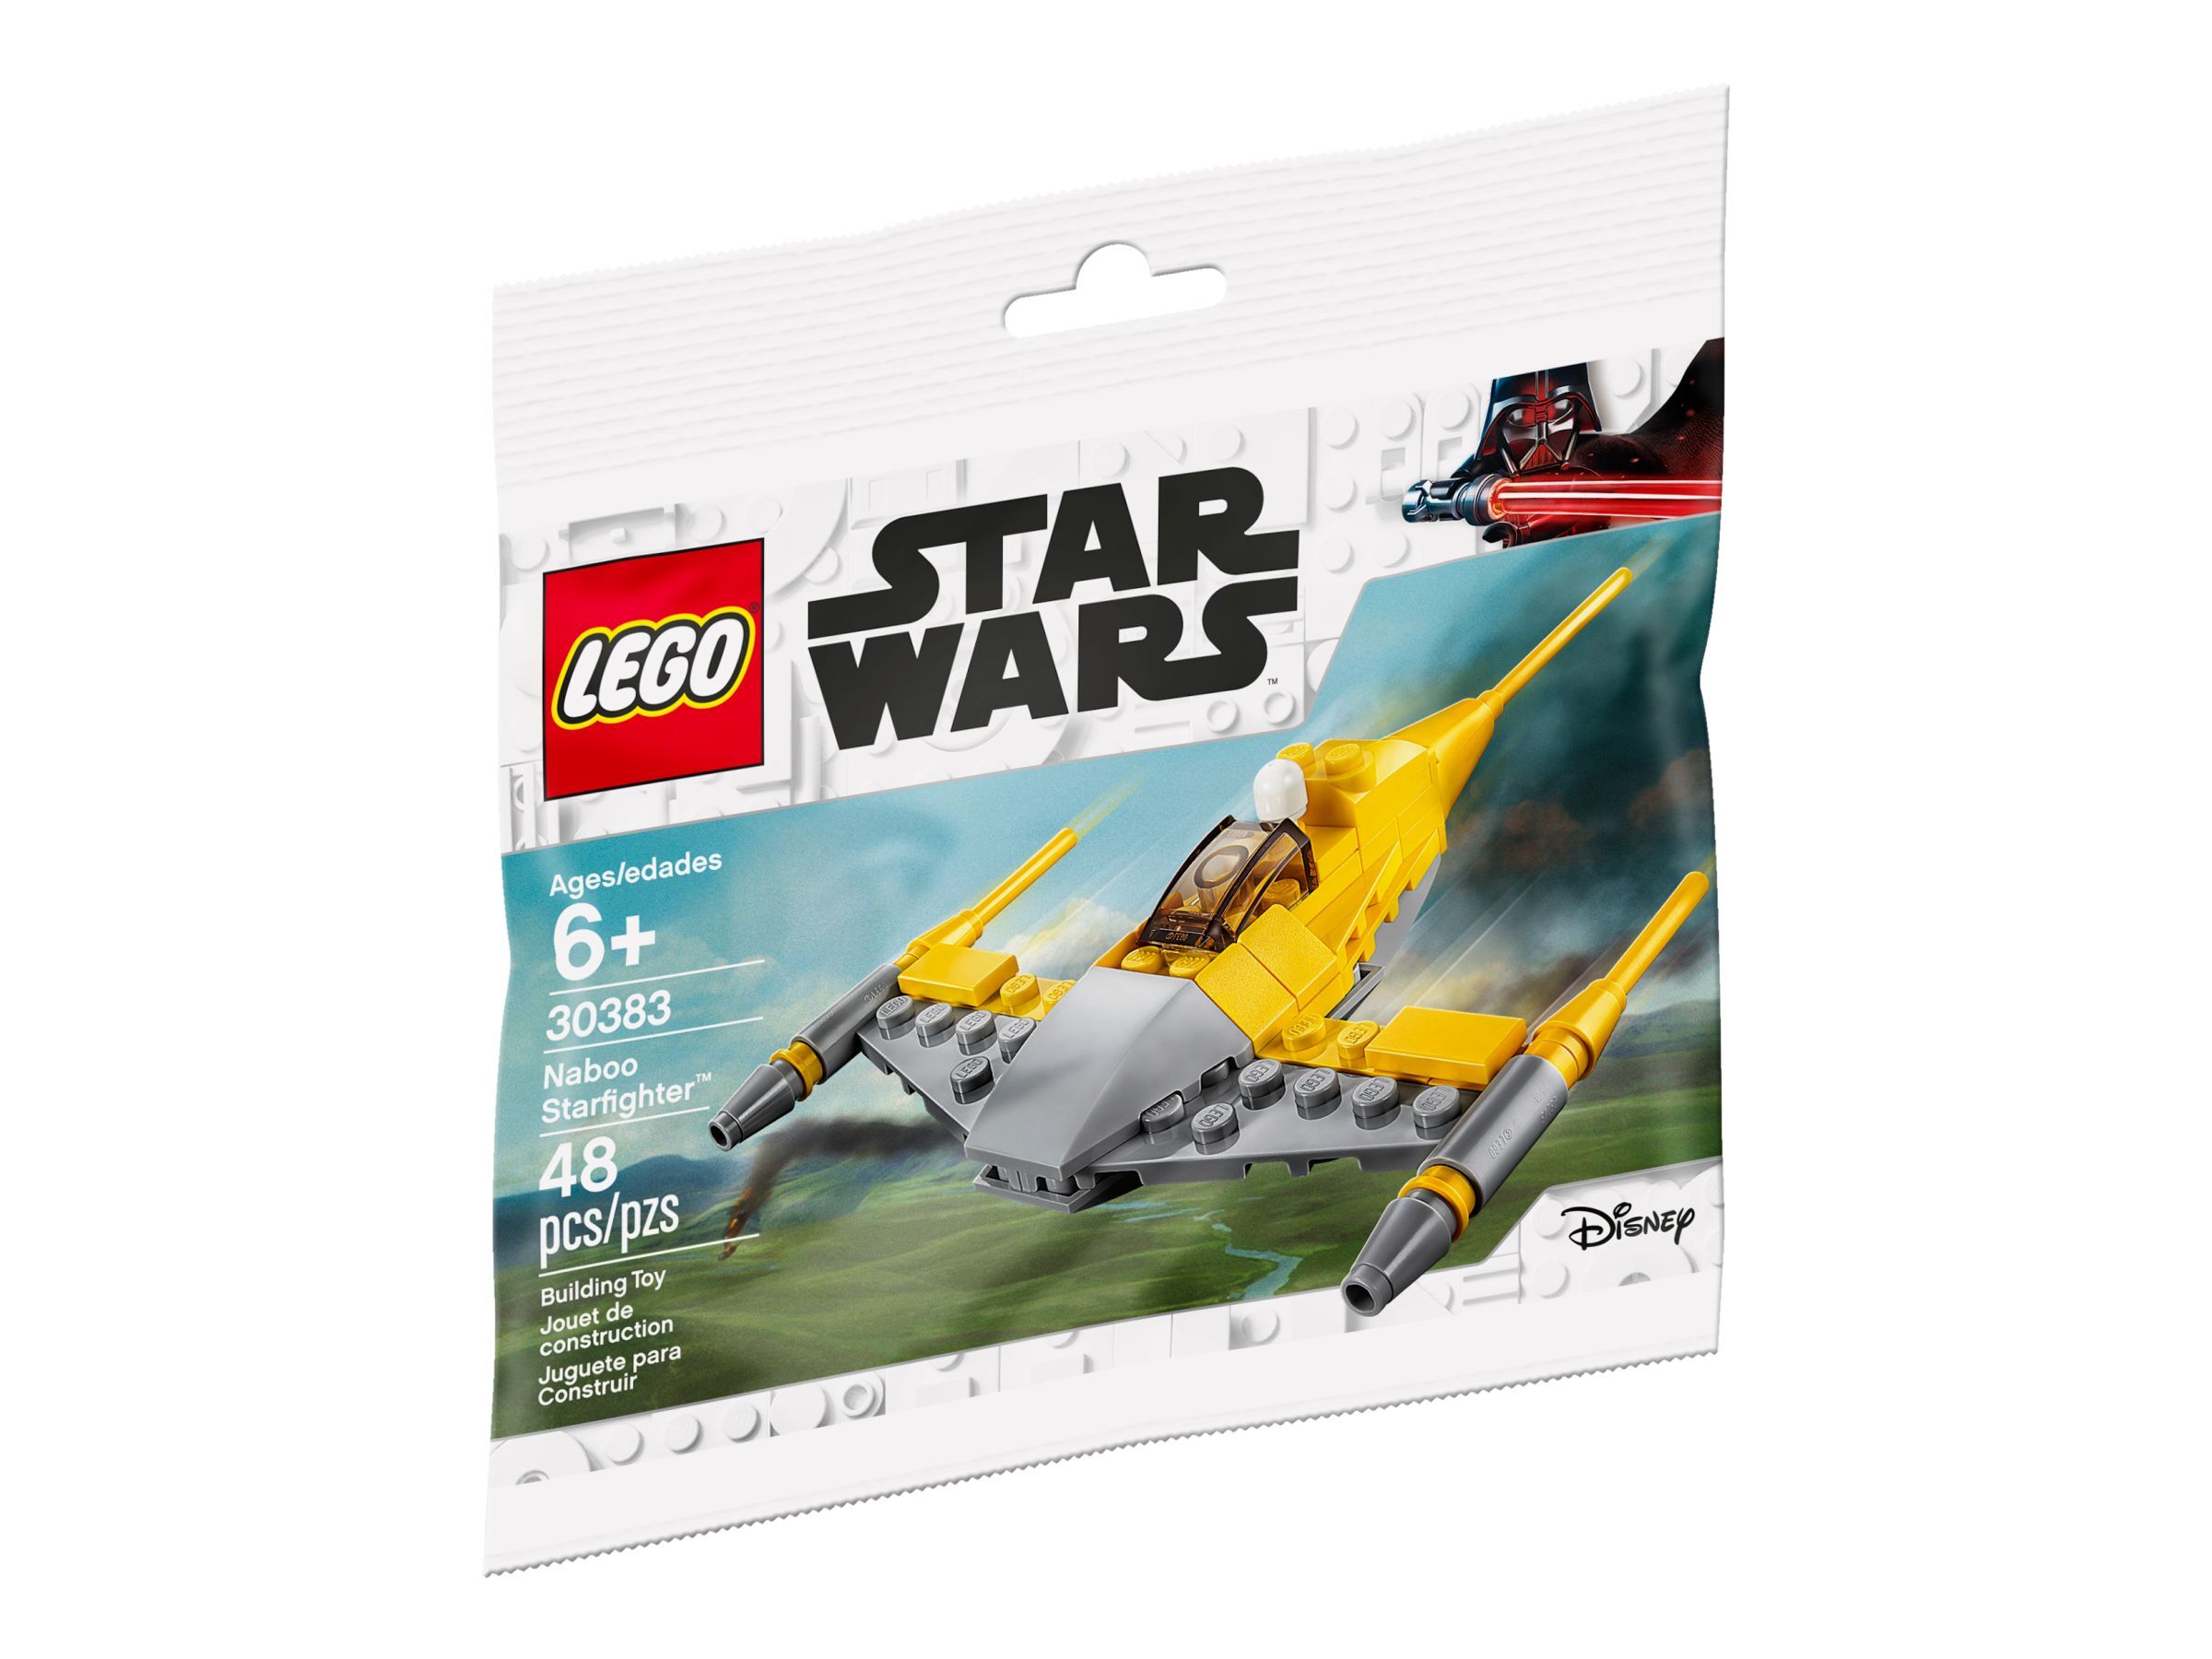 30461 PODRACER & Naboo Starfighter 30383 Buildable 3 Items Poly Bag Bundle LEGO Galaxy Star Ships Wars Mini Ship Pack Snowspeeder 30384 20 Years Bundled with 